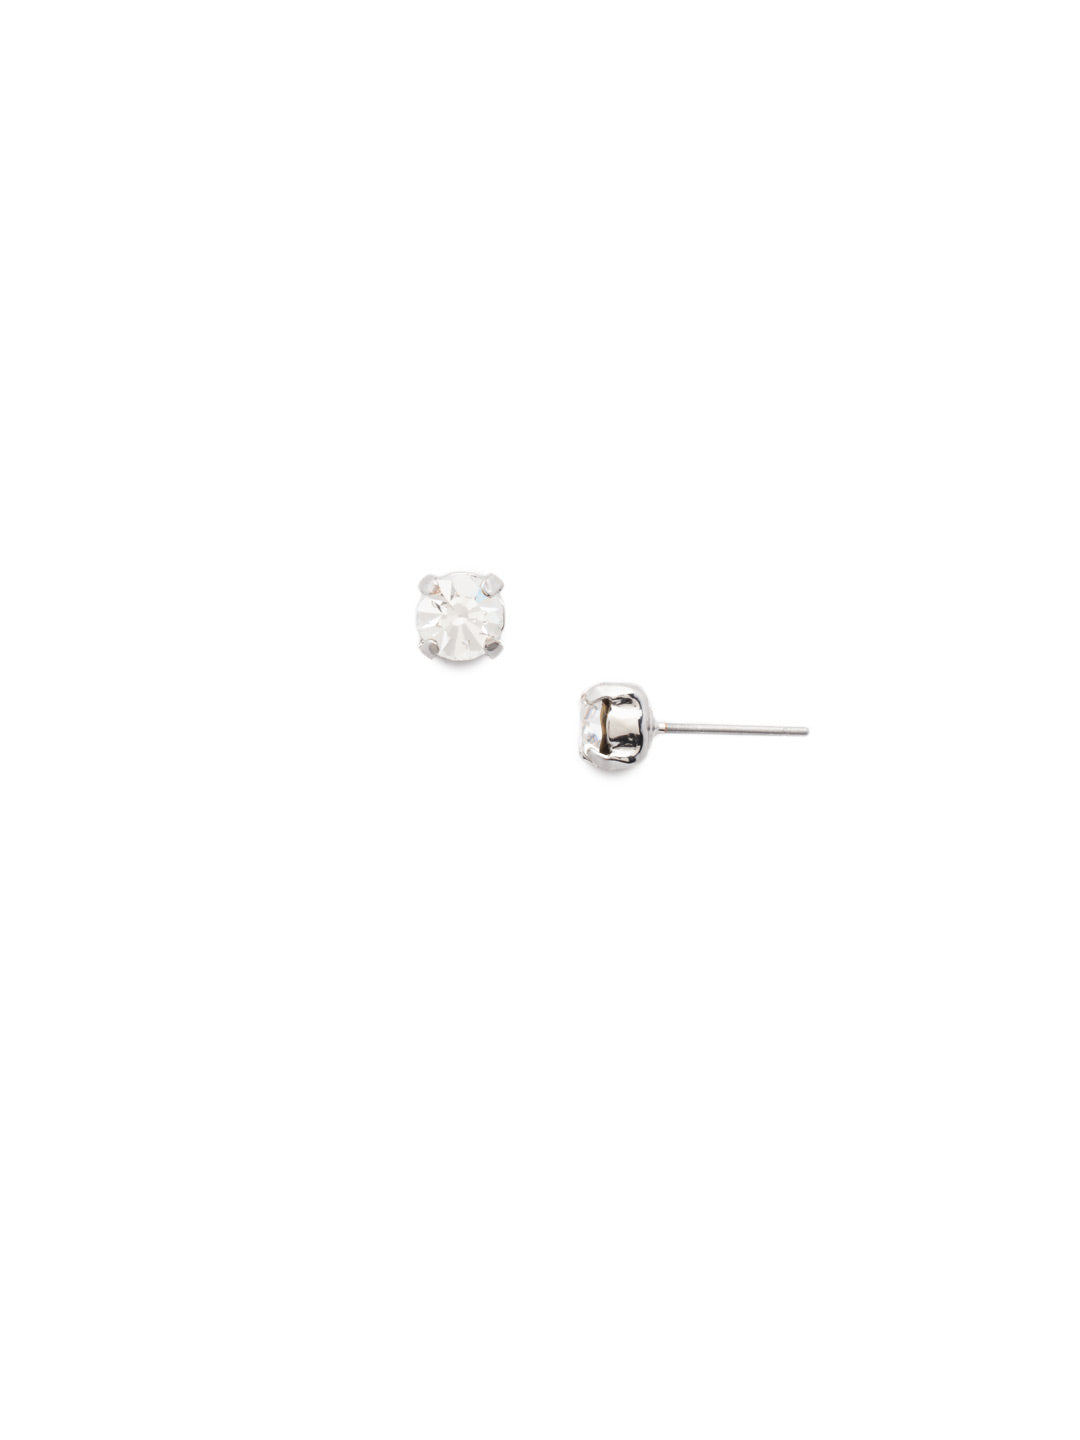 Jayda Stud Earrings - EDN32PDCRY - <p>The Jayda Stud Earrings are the perfect every day wardrobe staple. A round crystal nestles perfectly in a metal plated post with four prongs. </p><p>Need help picking a stud? <a href="https://www.sorrelli.com/blogs/sisterhood/round-stud-earrings-101-a-rundown-of-sizes-styles-and-sparkle">Check out our size guide!</a> From Sorrelli's Crystal collection in our Palladium finish.</p>